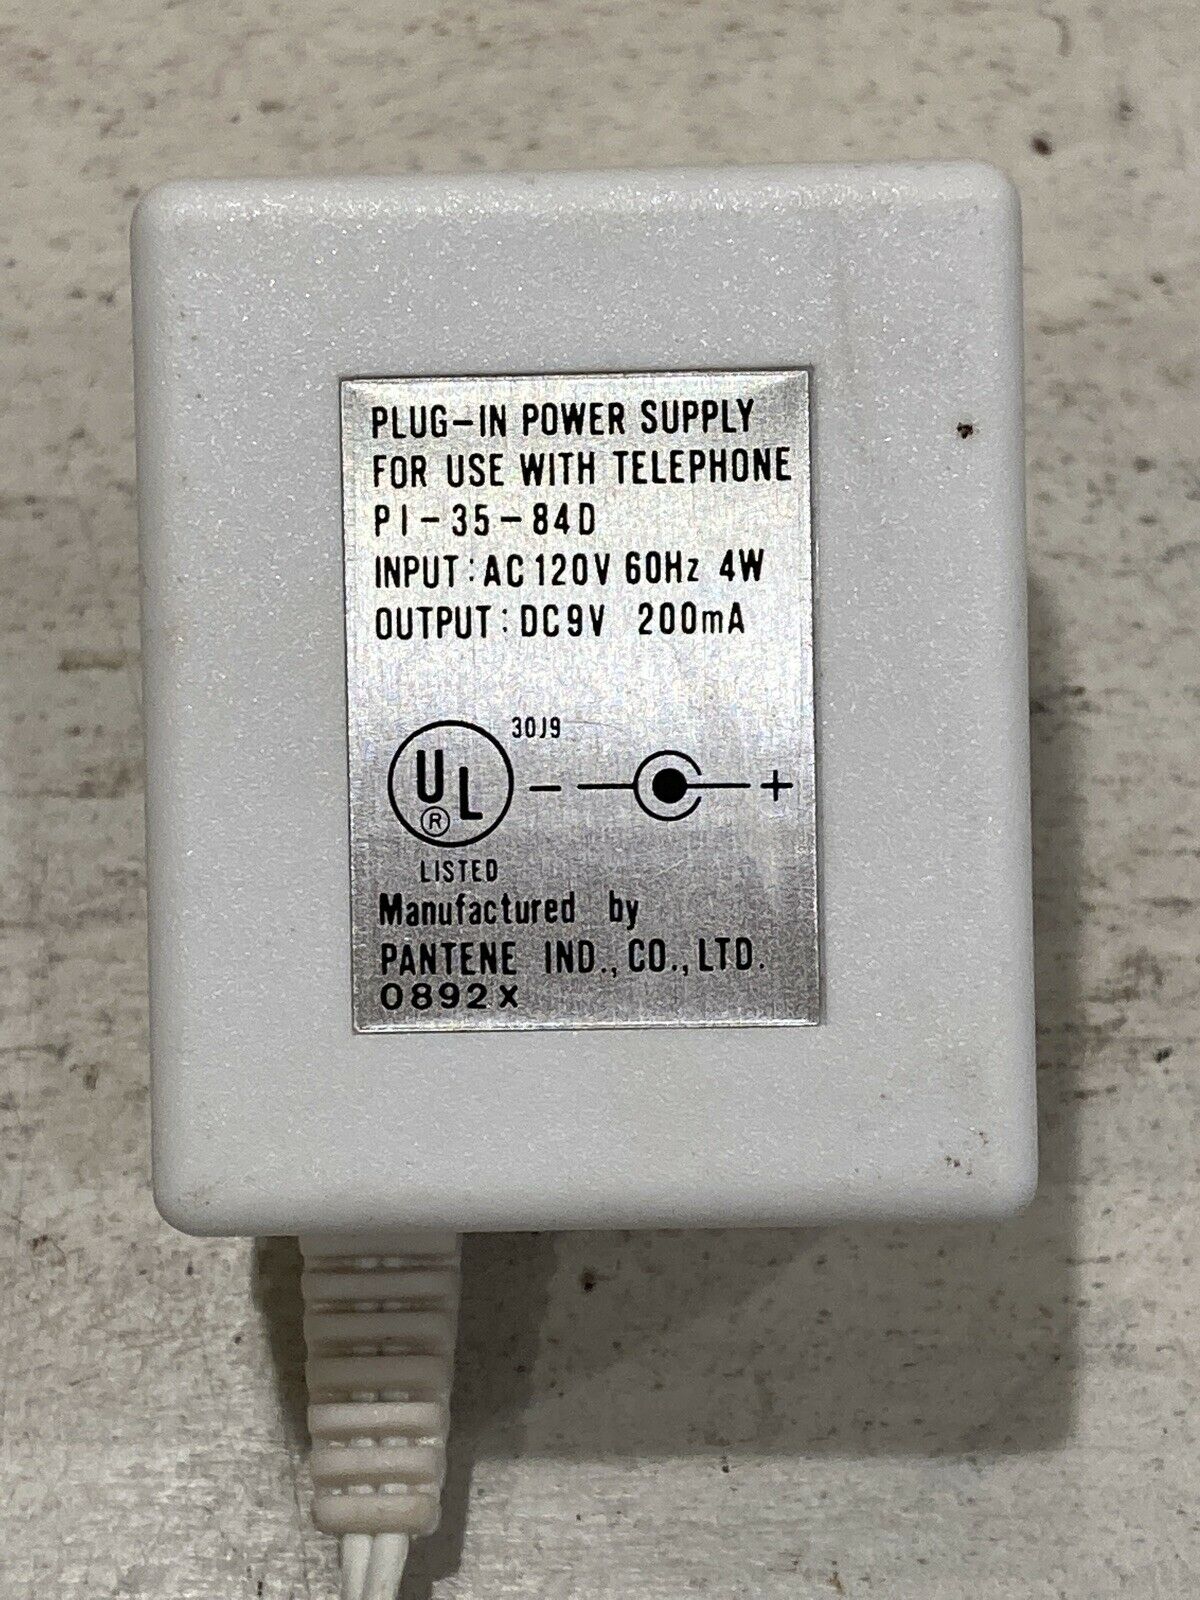 Plug In Power Supply For Telephone P1-35-84D Input AC 120V Output DC 9V Pantene Type: Plug Features: Powered Outpu